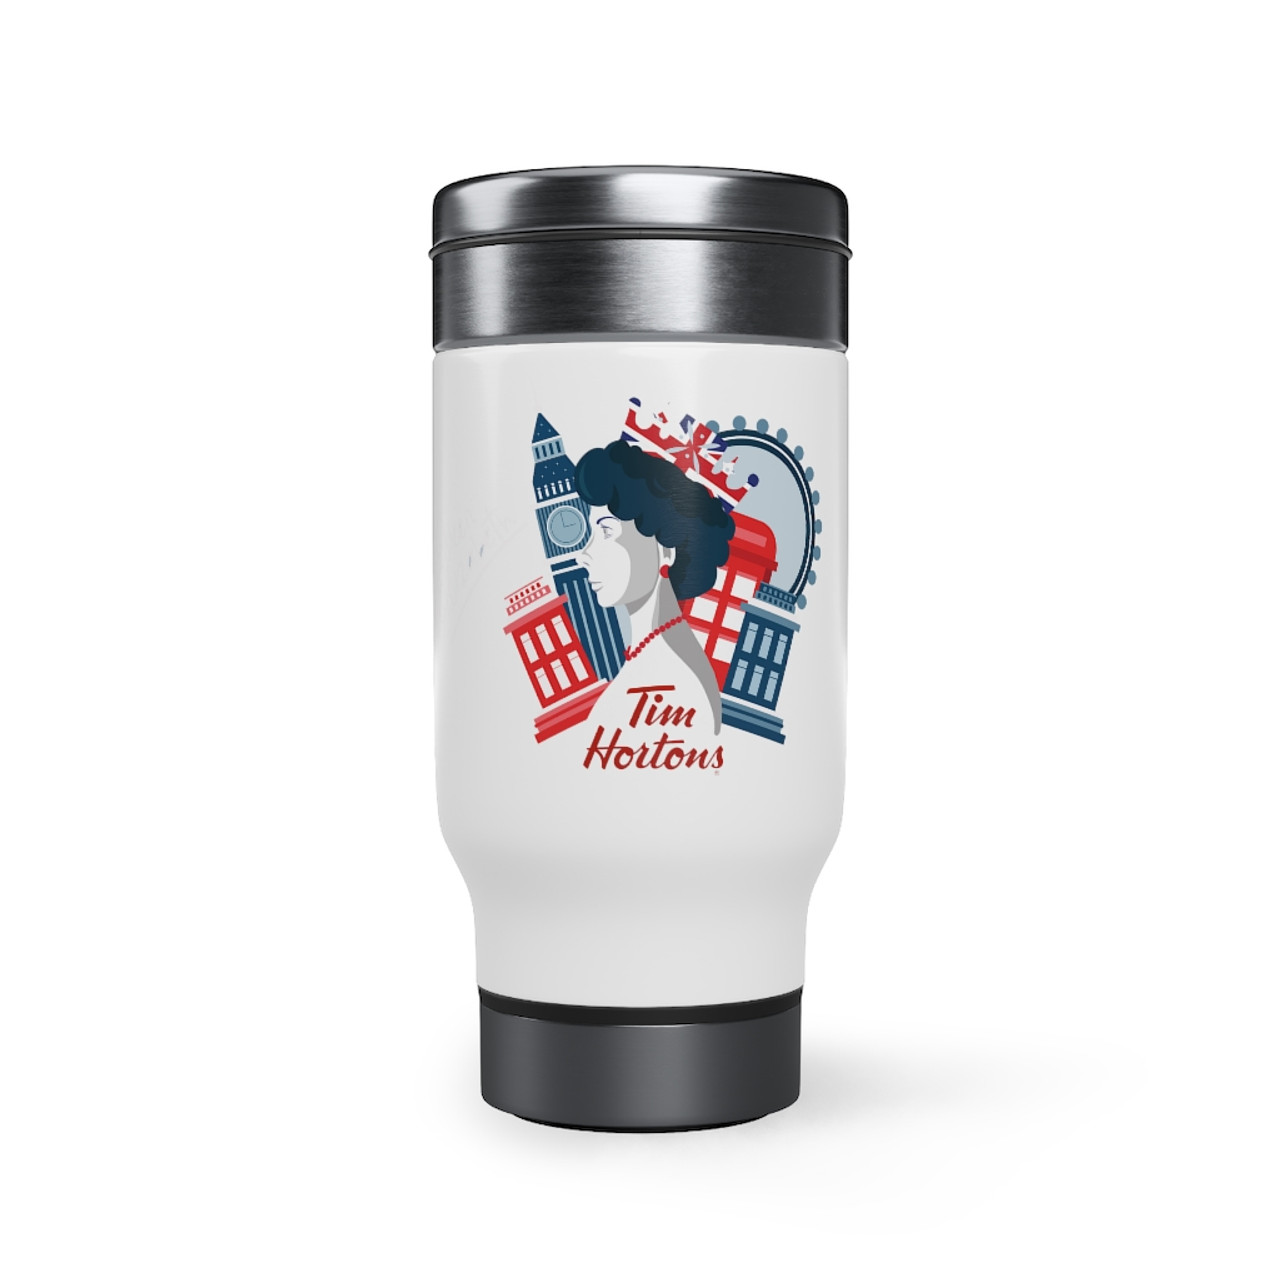 Queen Elizabeth Tim Hortons Stainless Steel Travel Mug with Handle, 14oz- A Canadian Tribute